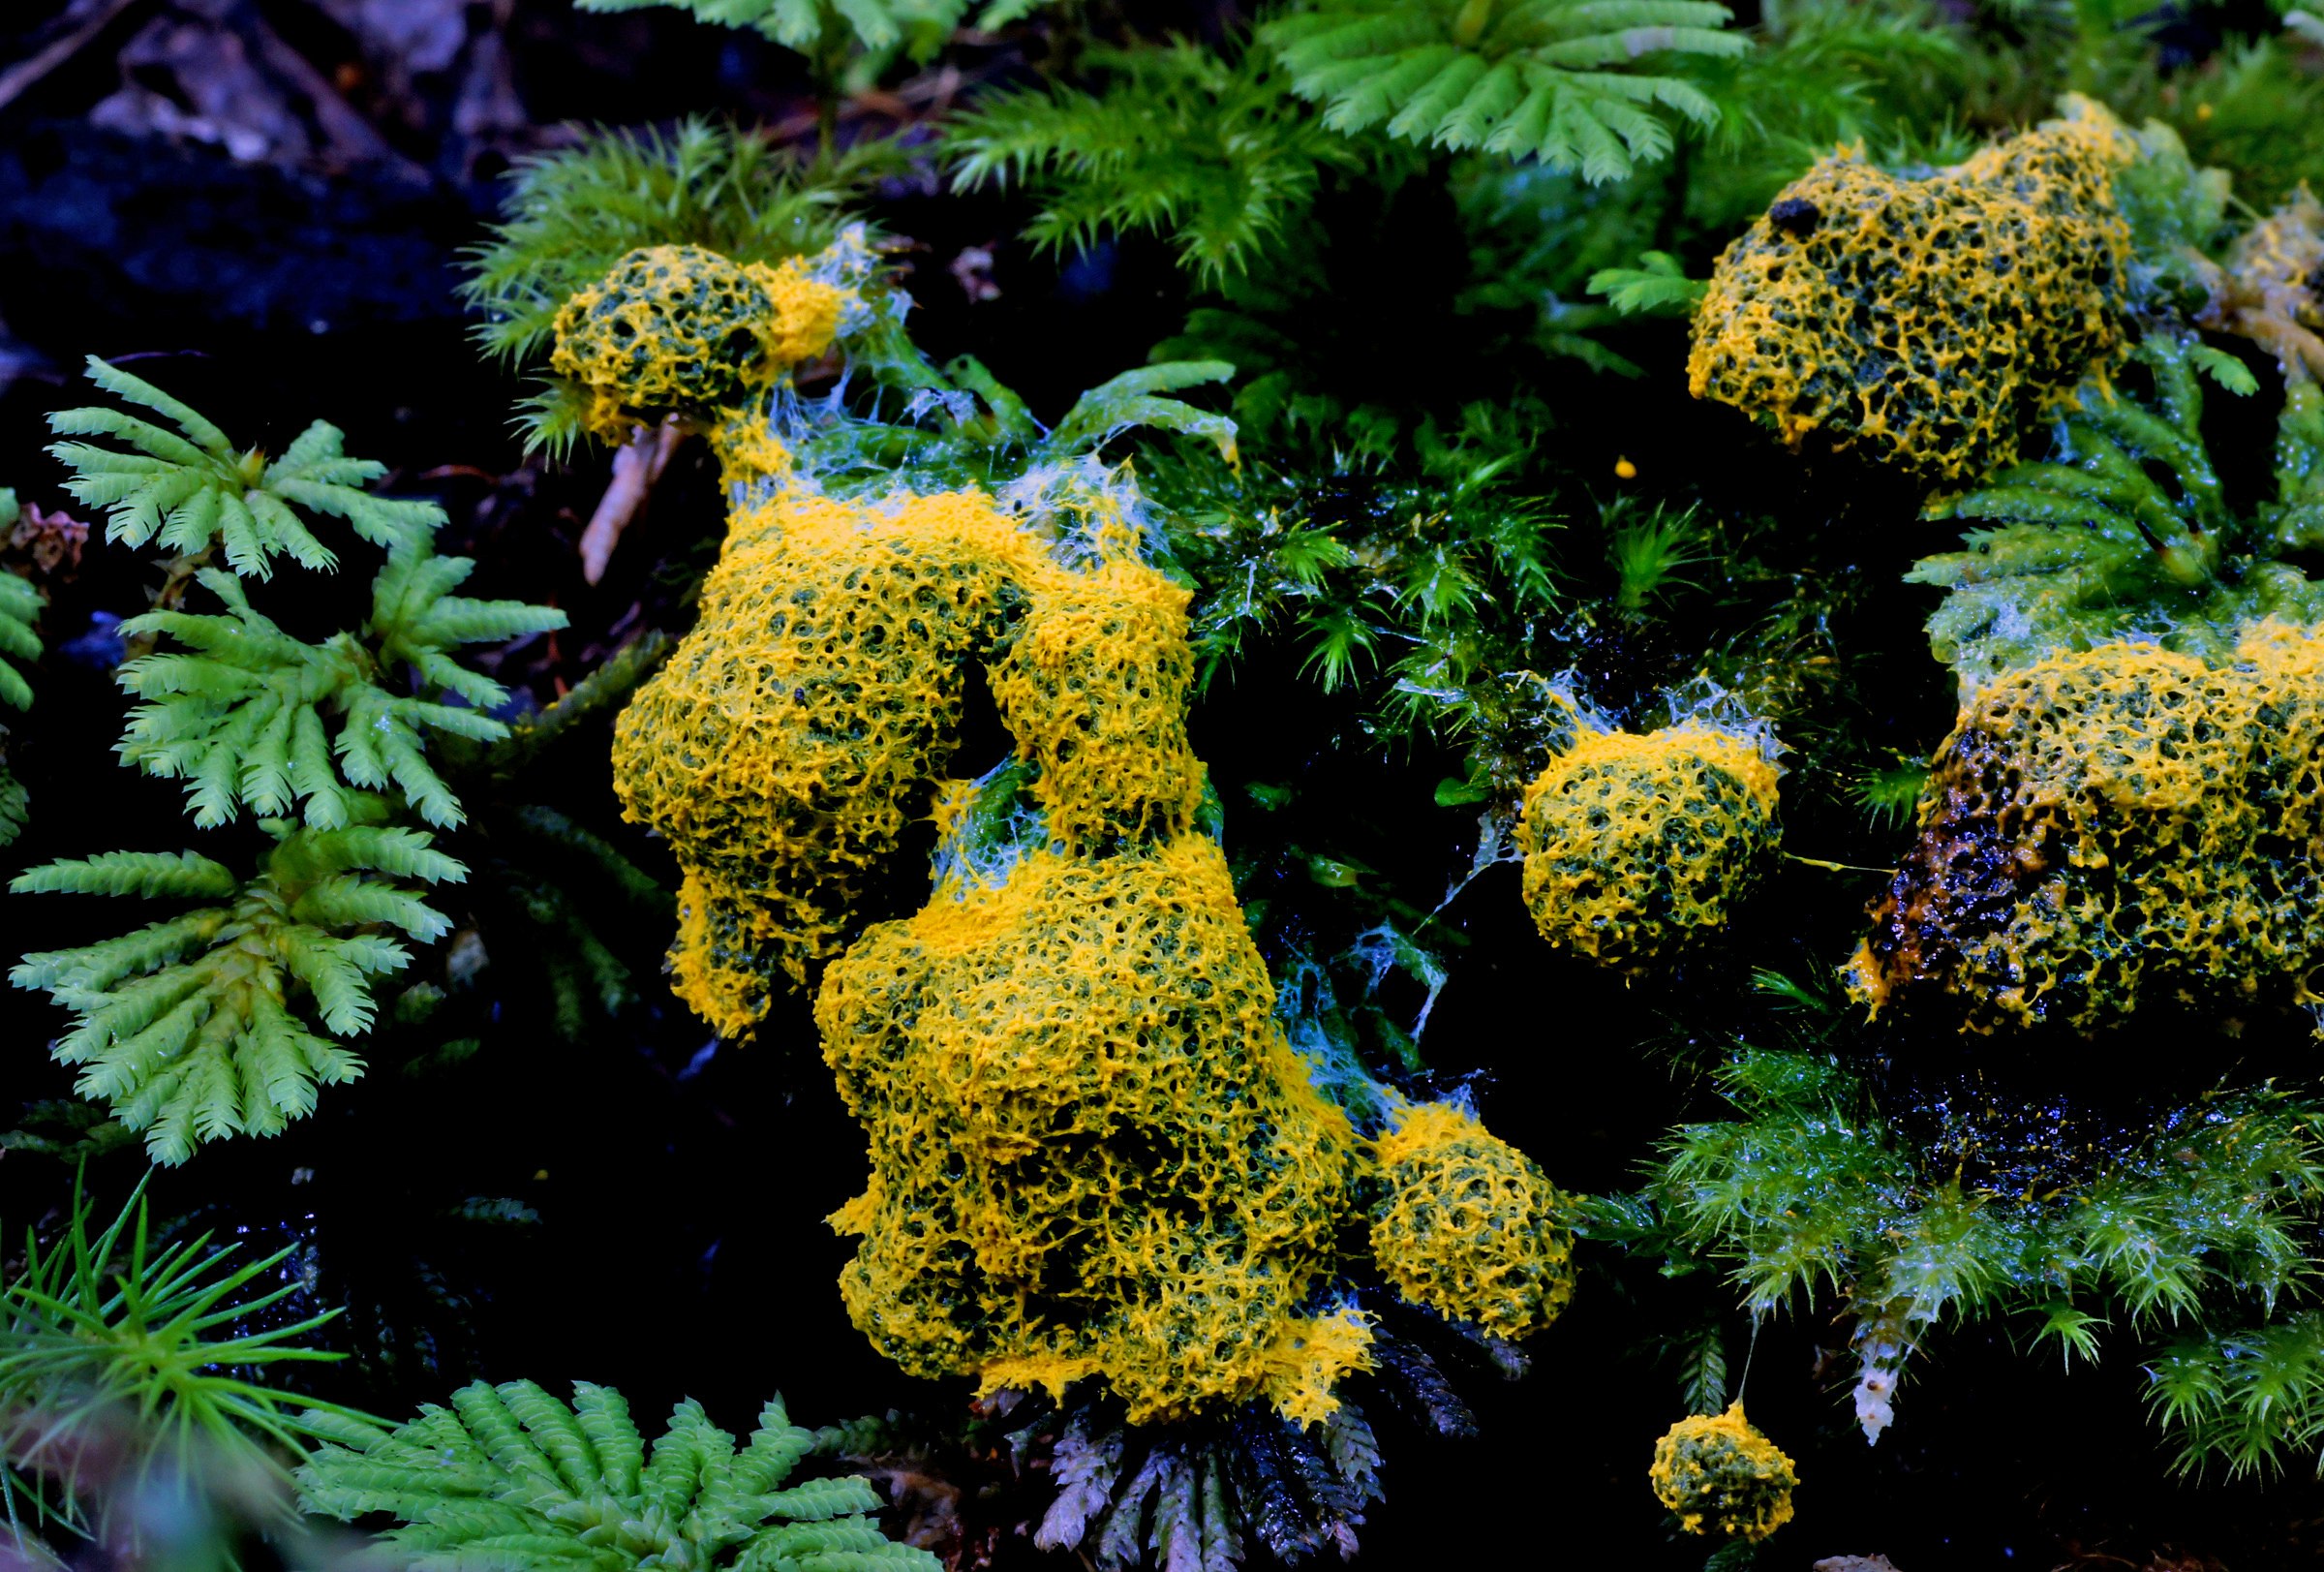 a bright yellow slime mold surrounded by leaves